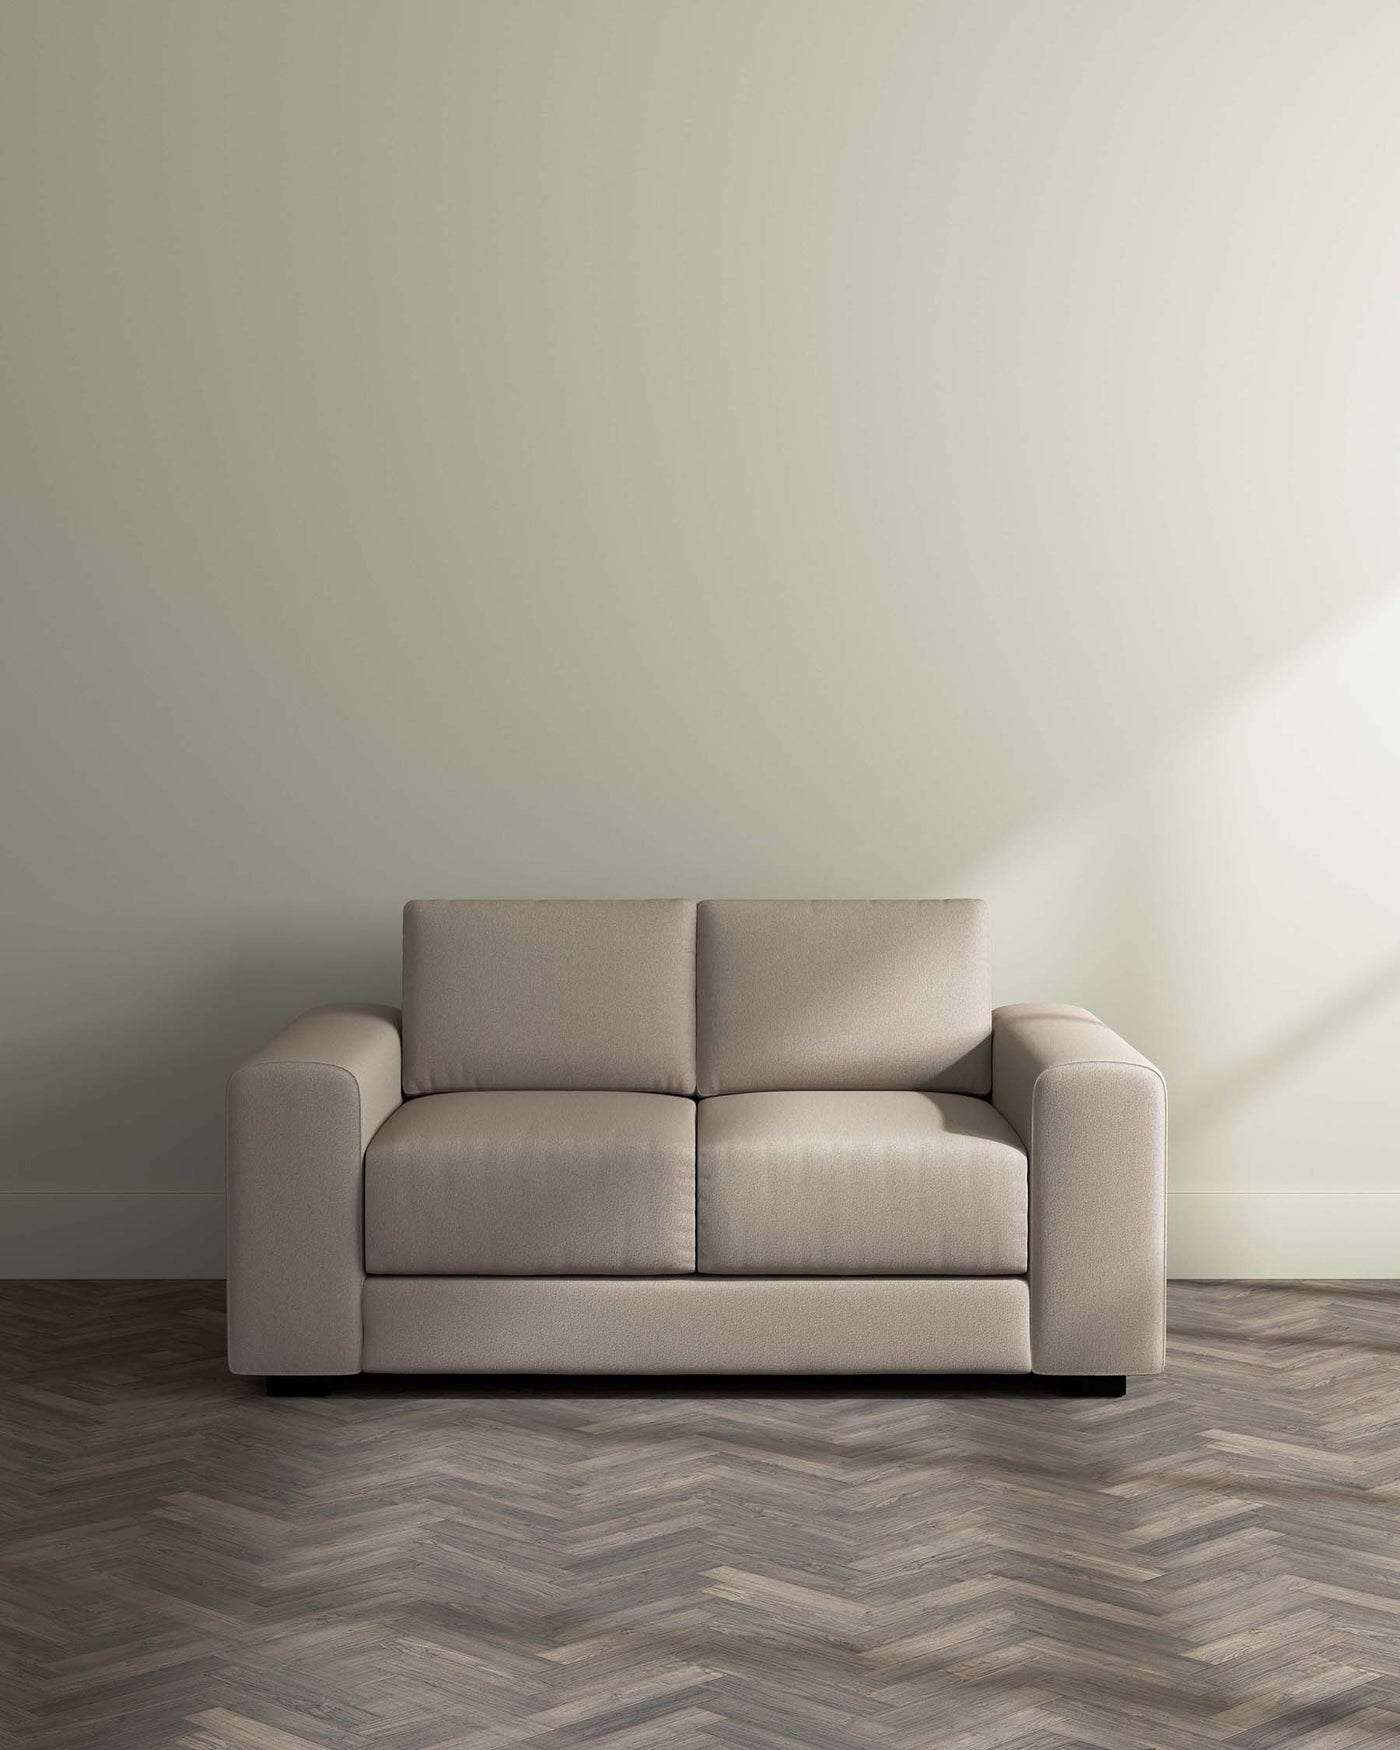 Modern beige three-seater sofa with sleek design and rounded armrests on a herringbone patterned floor against a light grey wall.